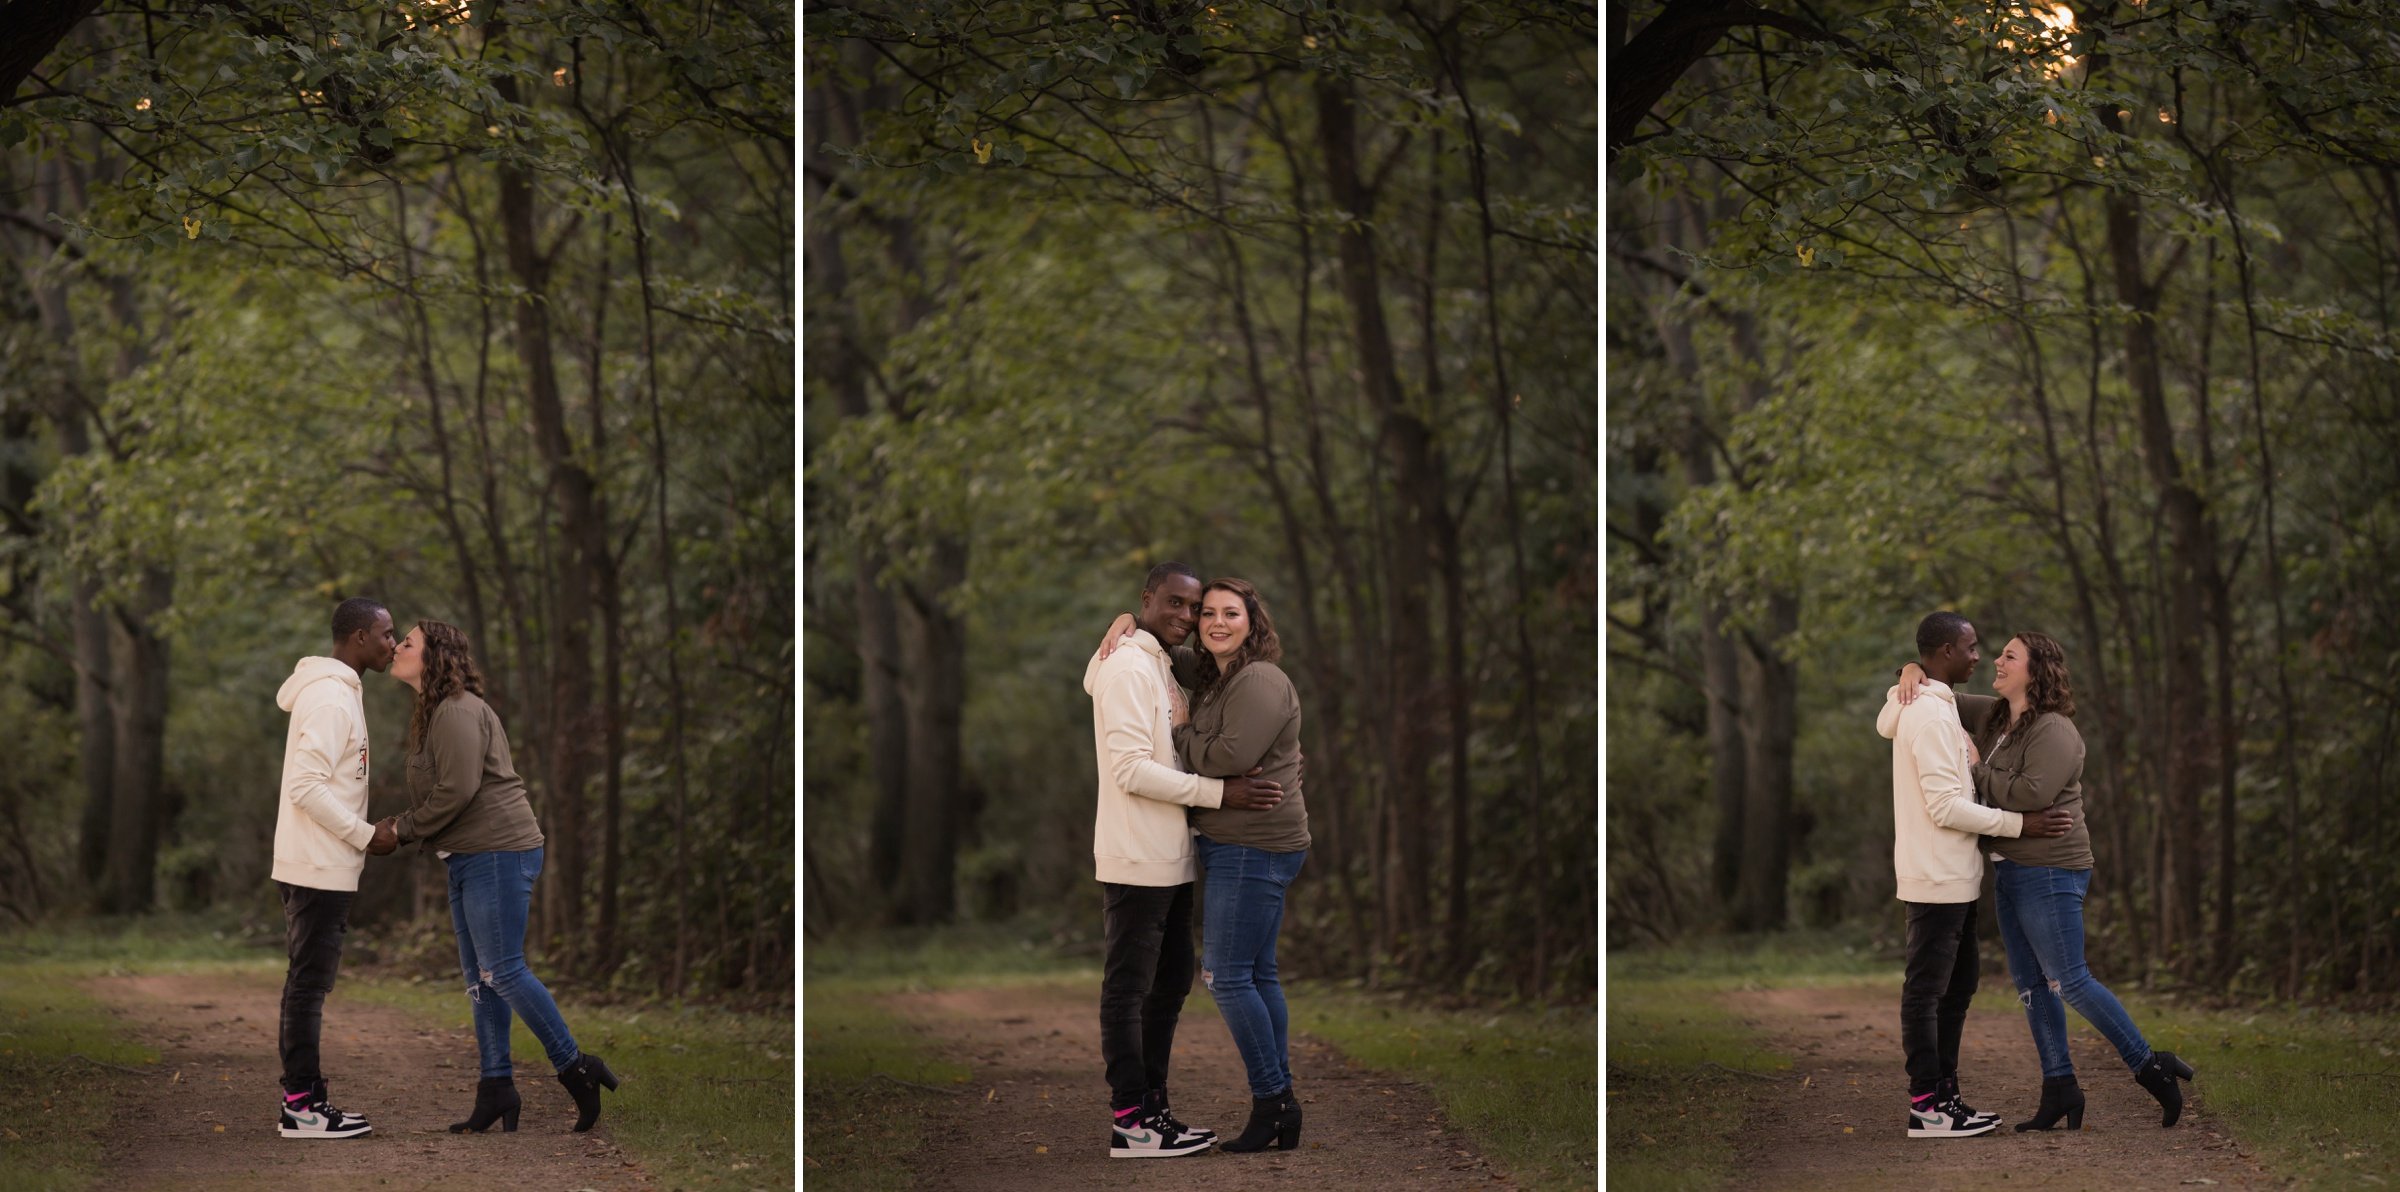 Jessica and Paul - A Sunset Bay Shore Park Engagement Session40.jpg